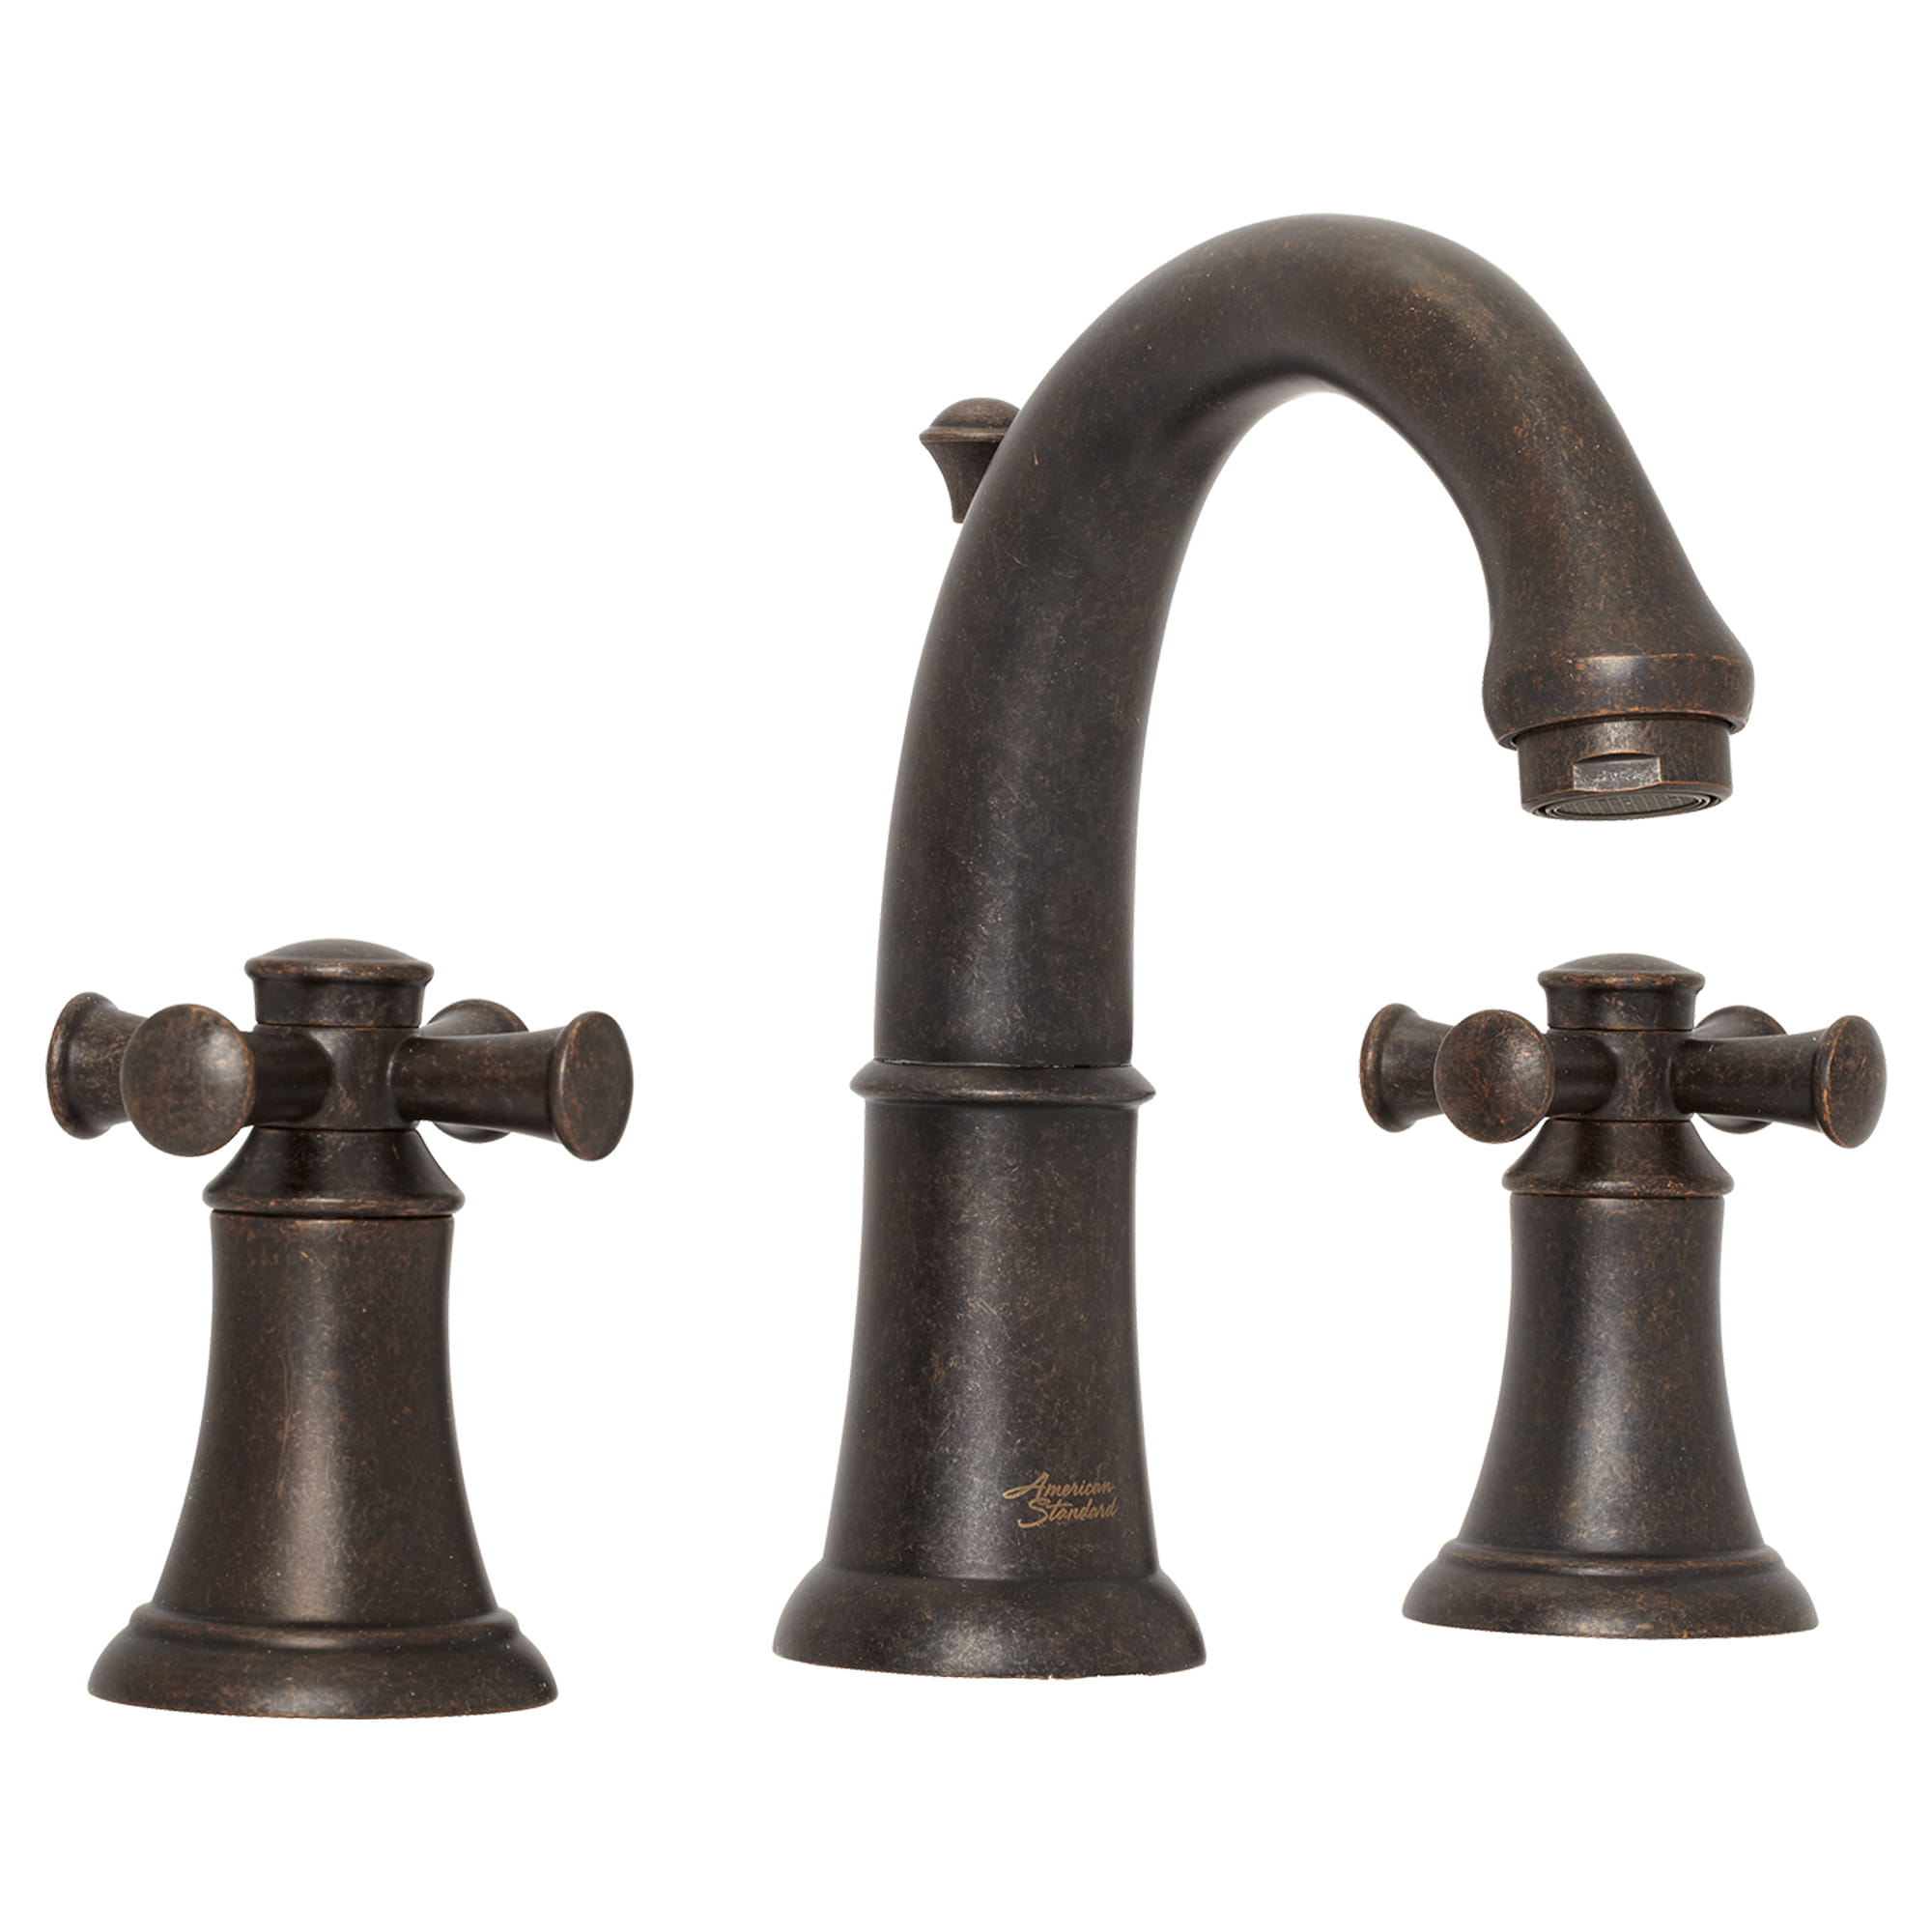 Portsmouth 8-In. Widespread 2-Handle Crescent Spout Bathroom Faucet 1.2 GPM with Cross Handles